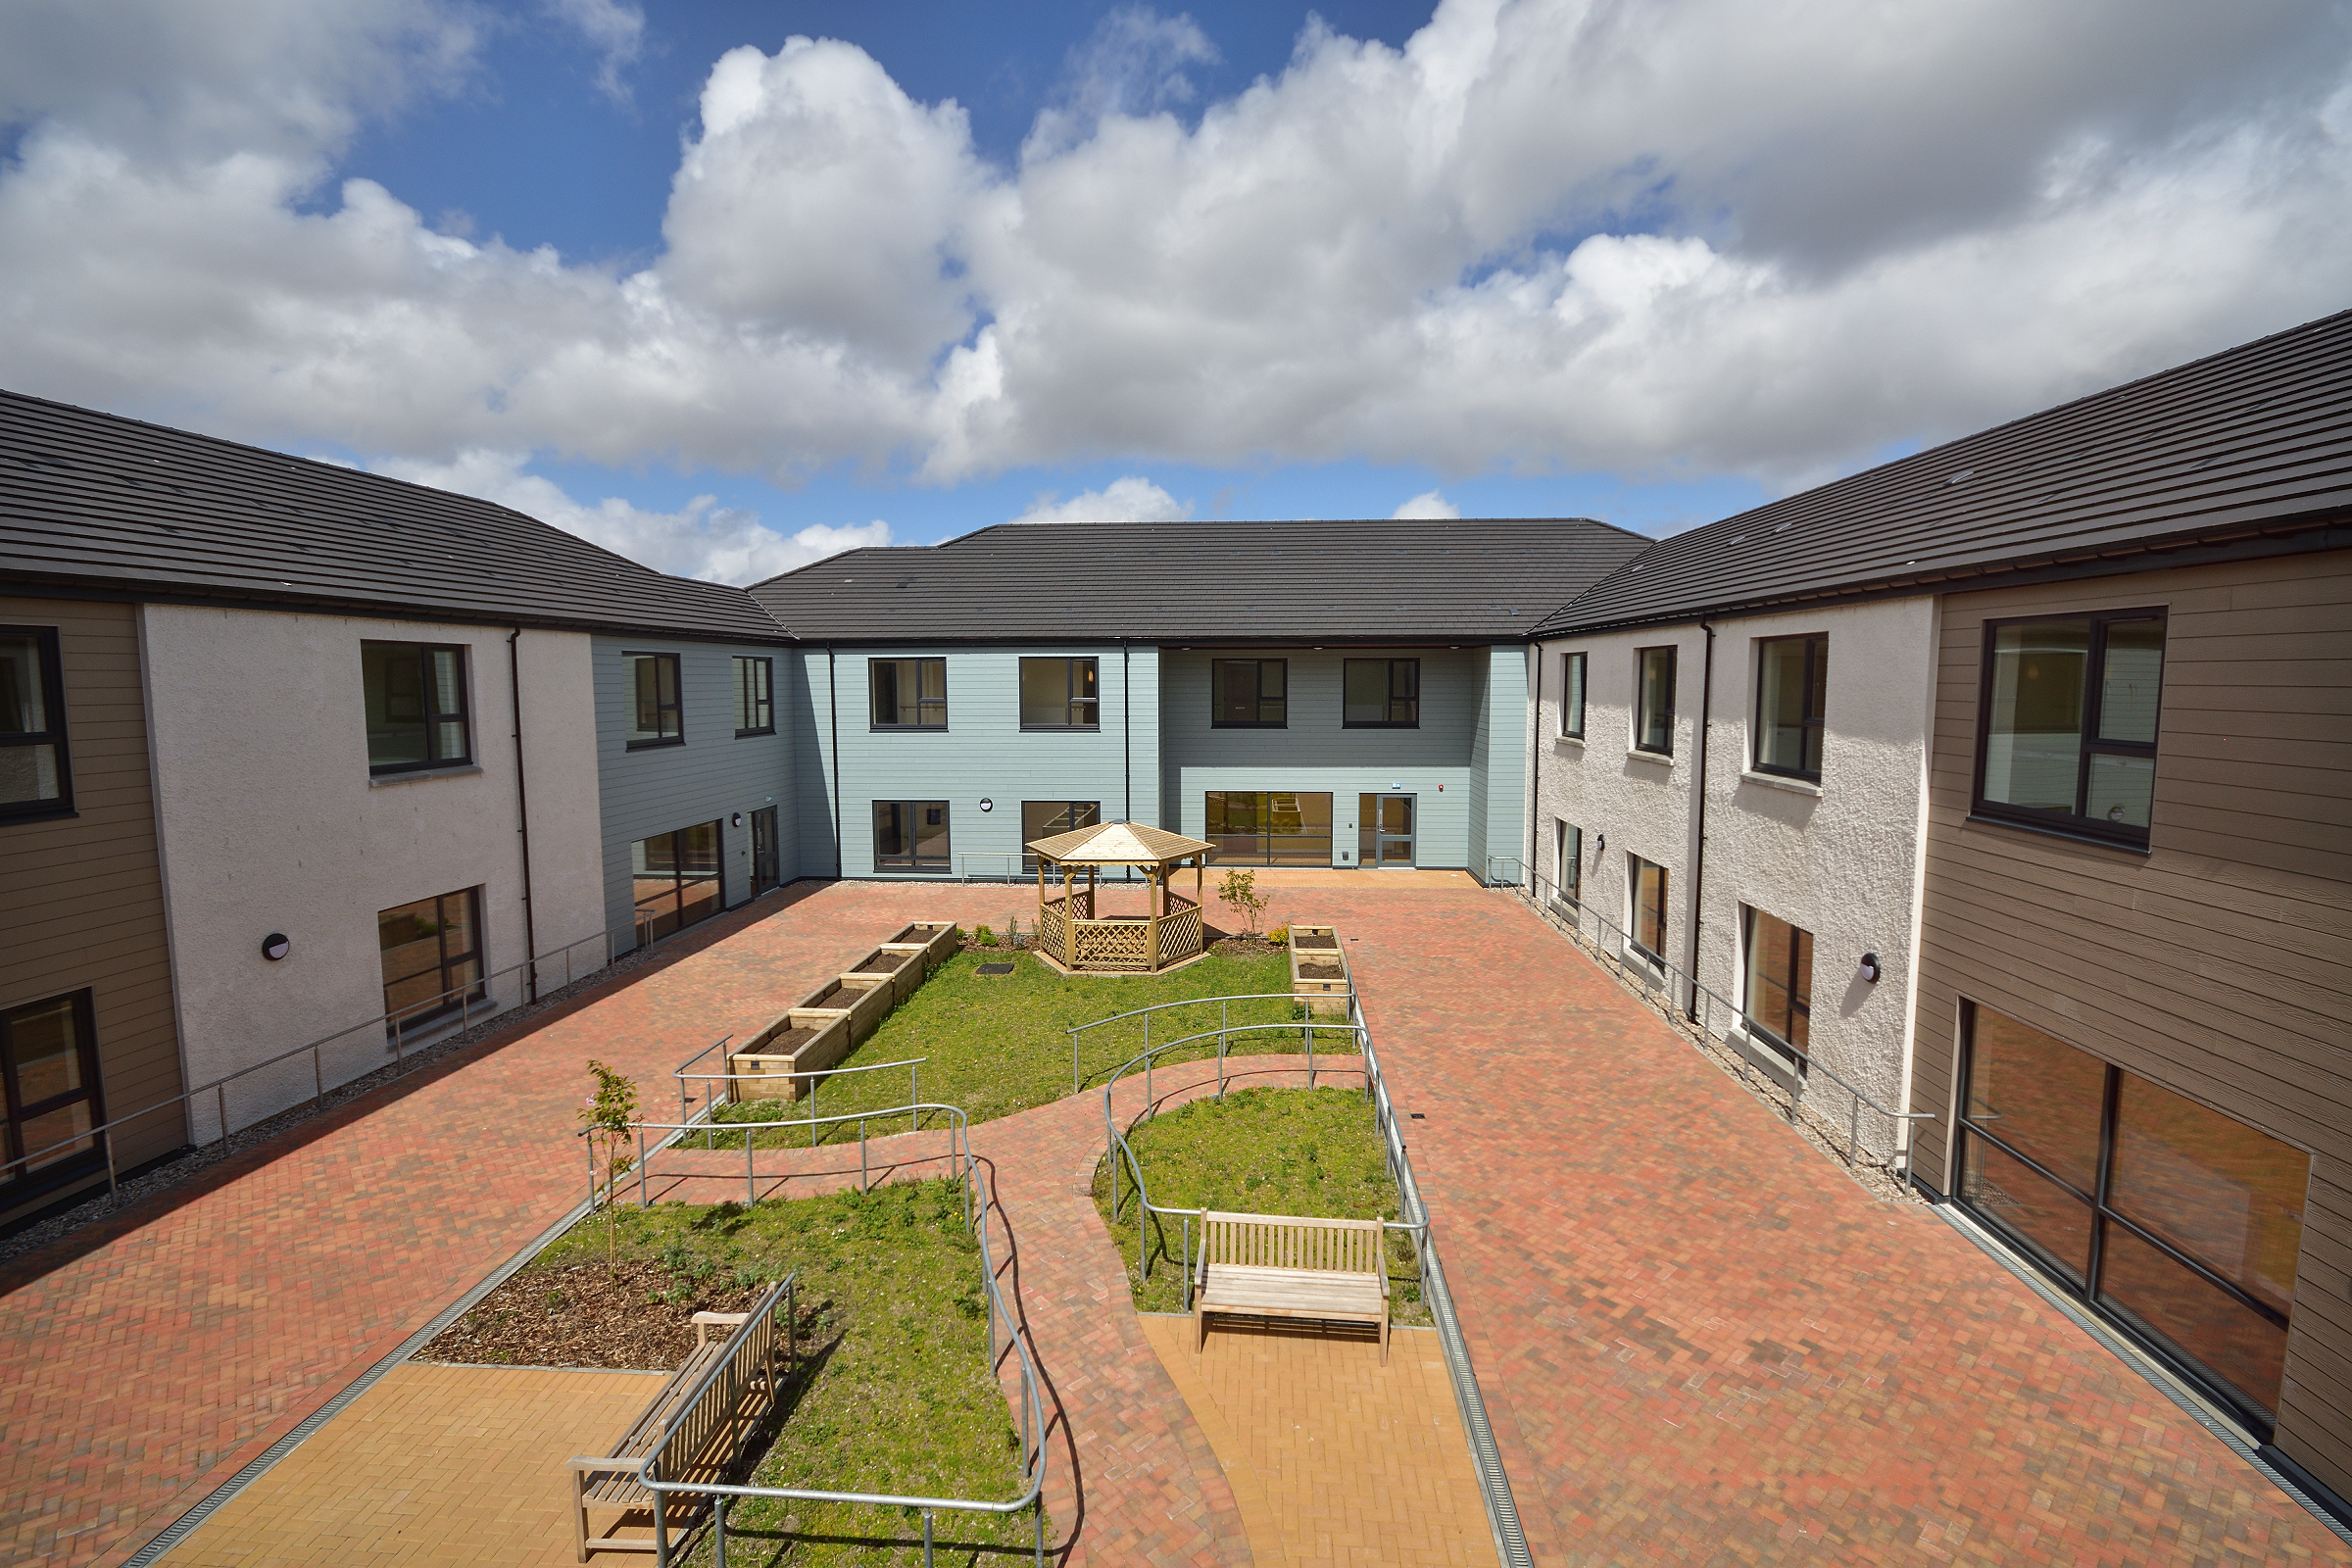 Goathill Housing and Care Home Project wins SURF Award